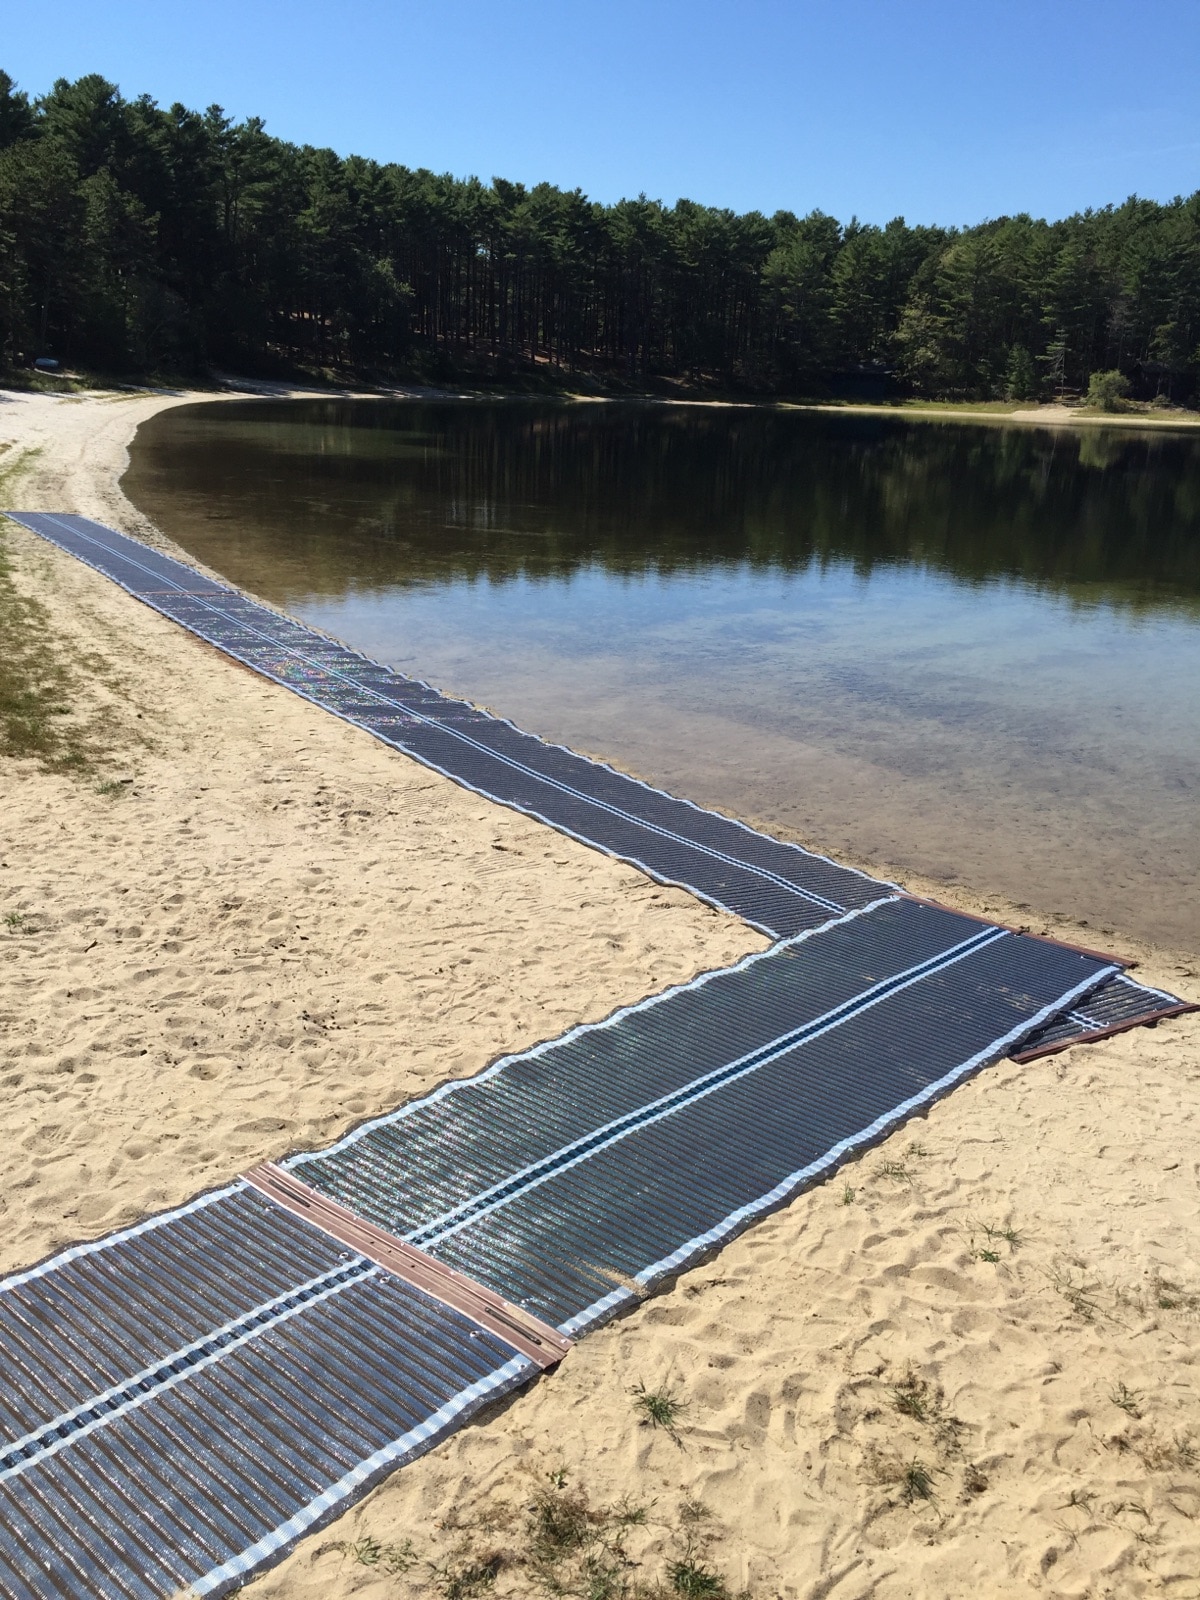 Beach mat comes in from the left to T with mat running along the water's edge of a pond surrounded by trees.